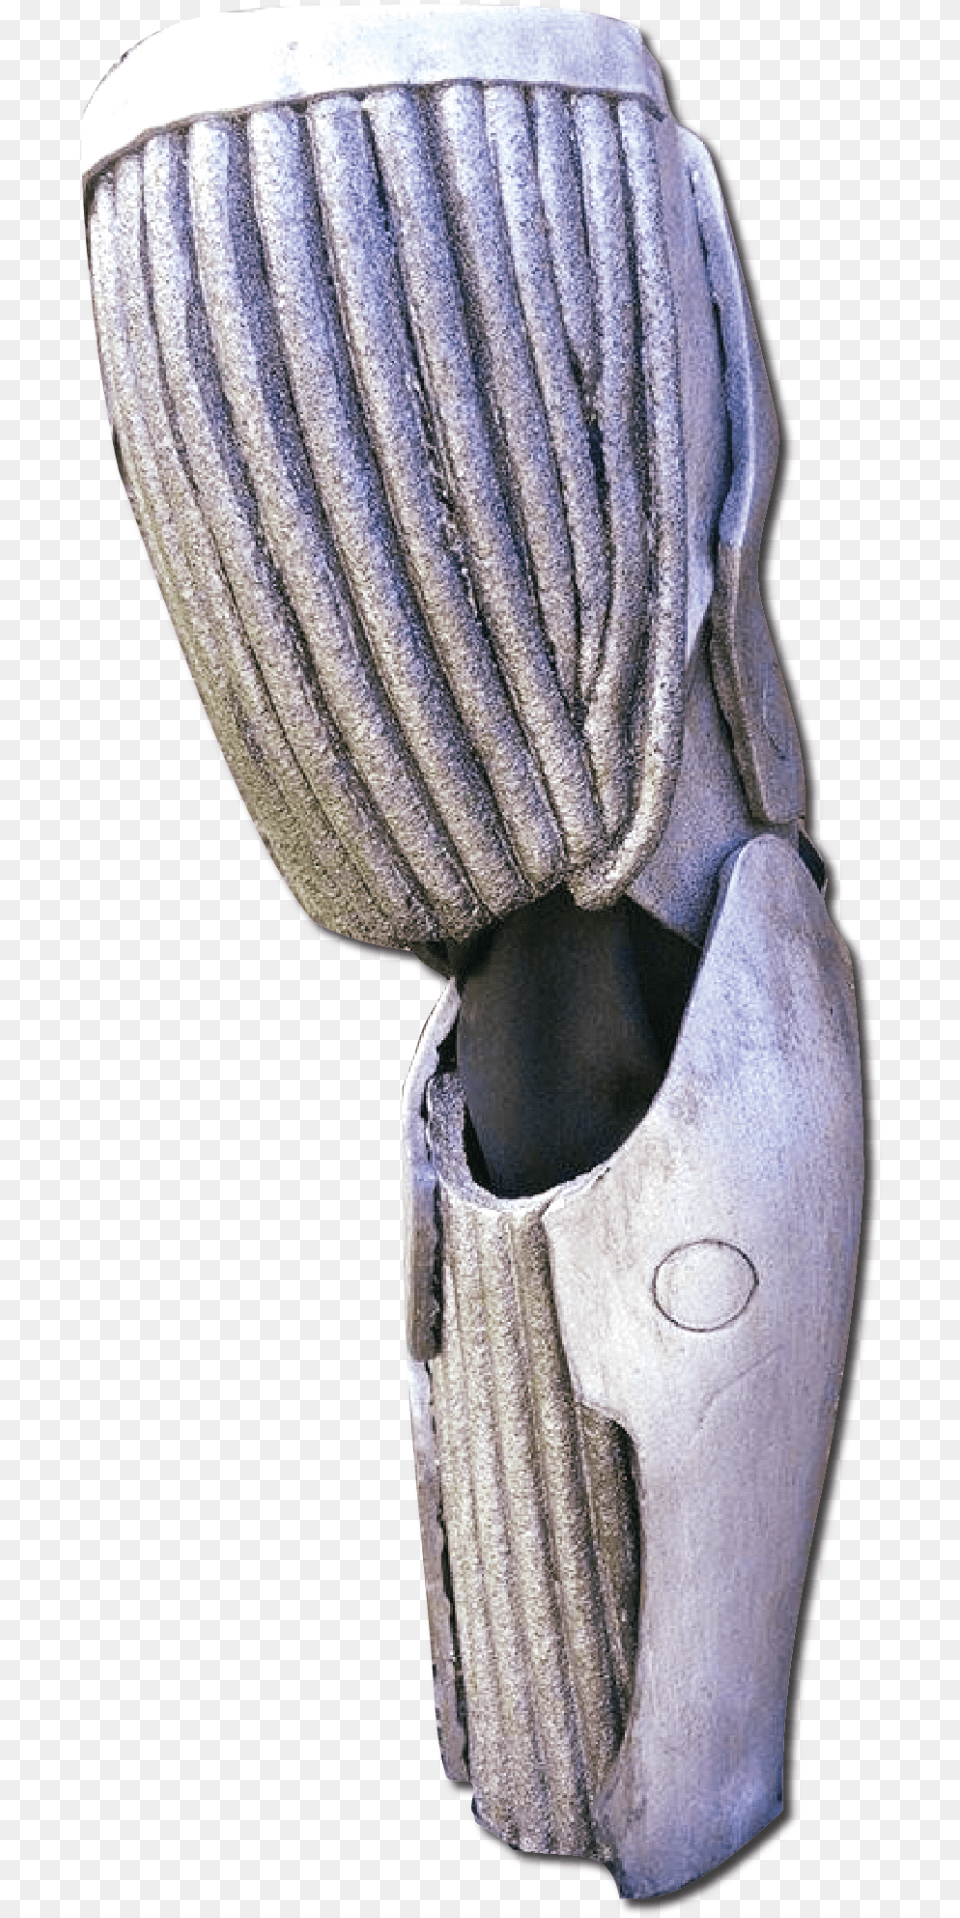 Cables Bionic Arm Cable39s Bionic Arm, Pottery, Clothing, Glove, Jar Png